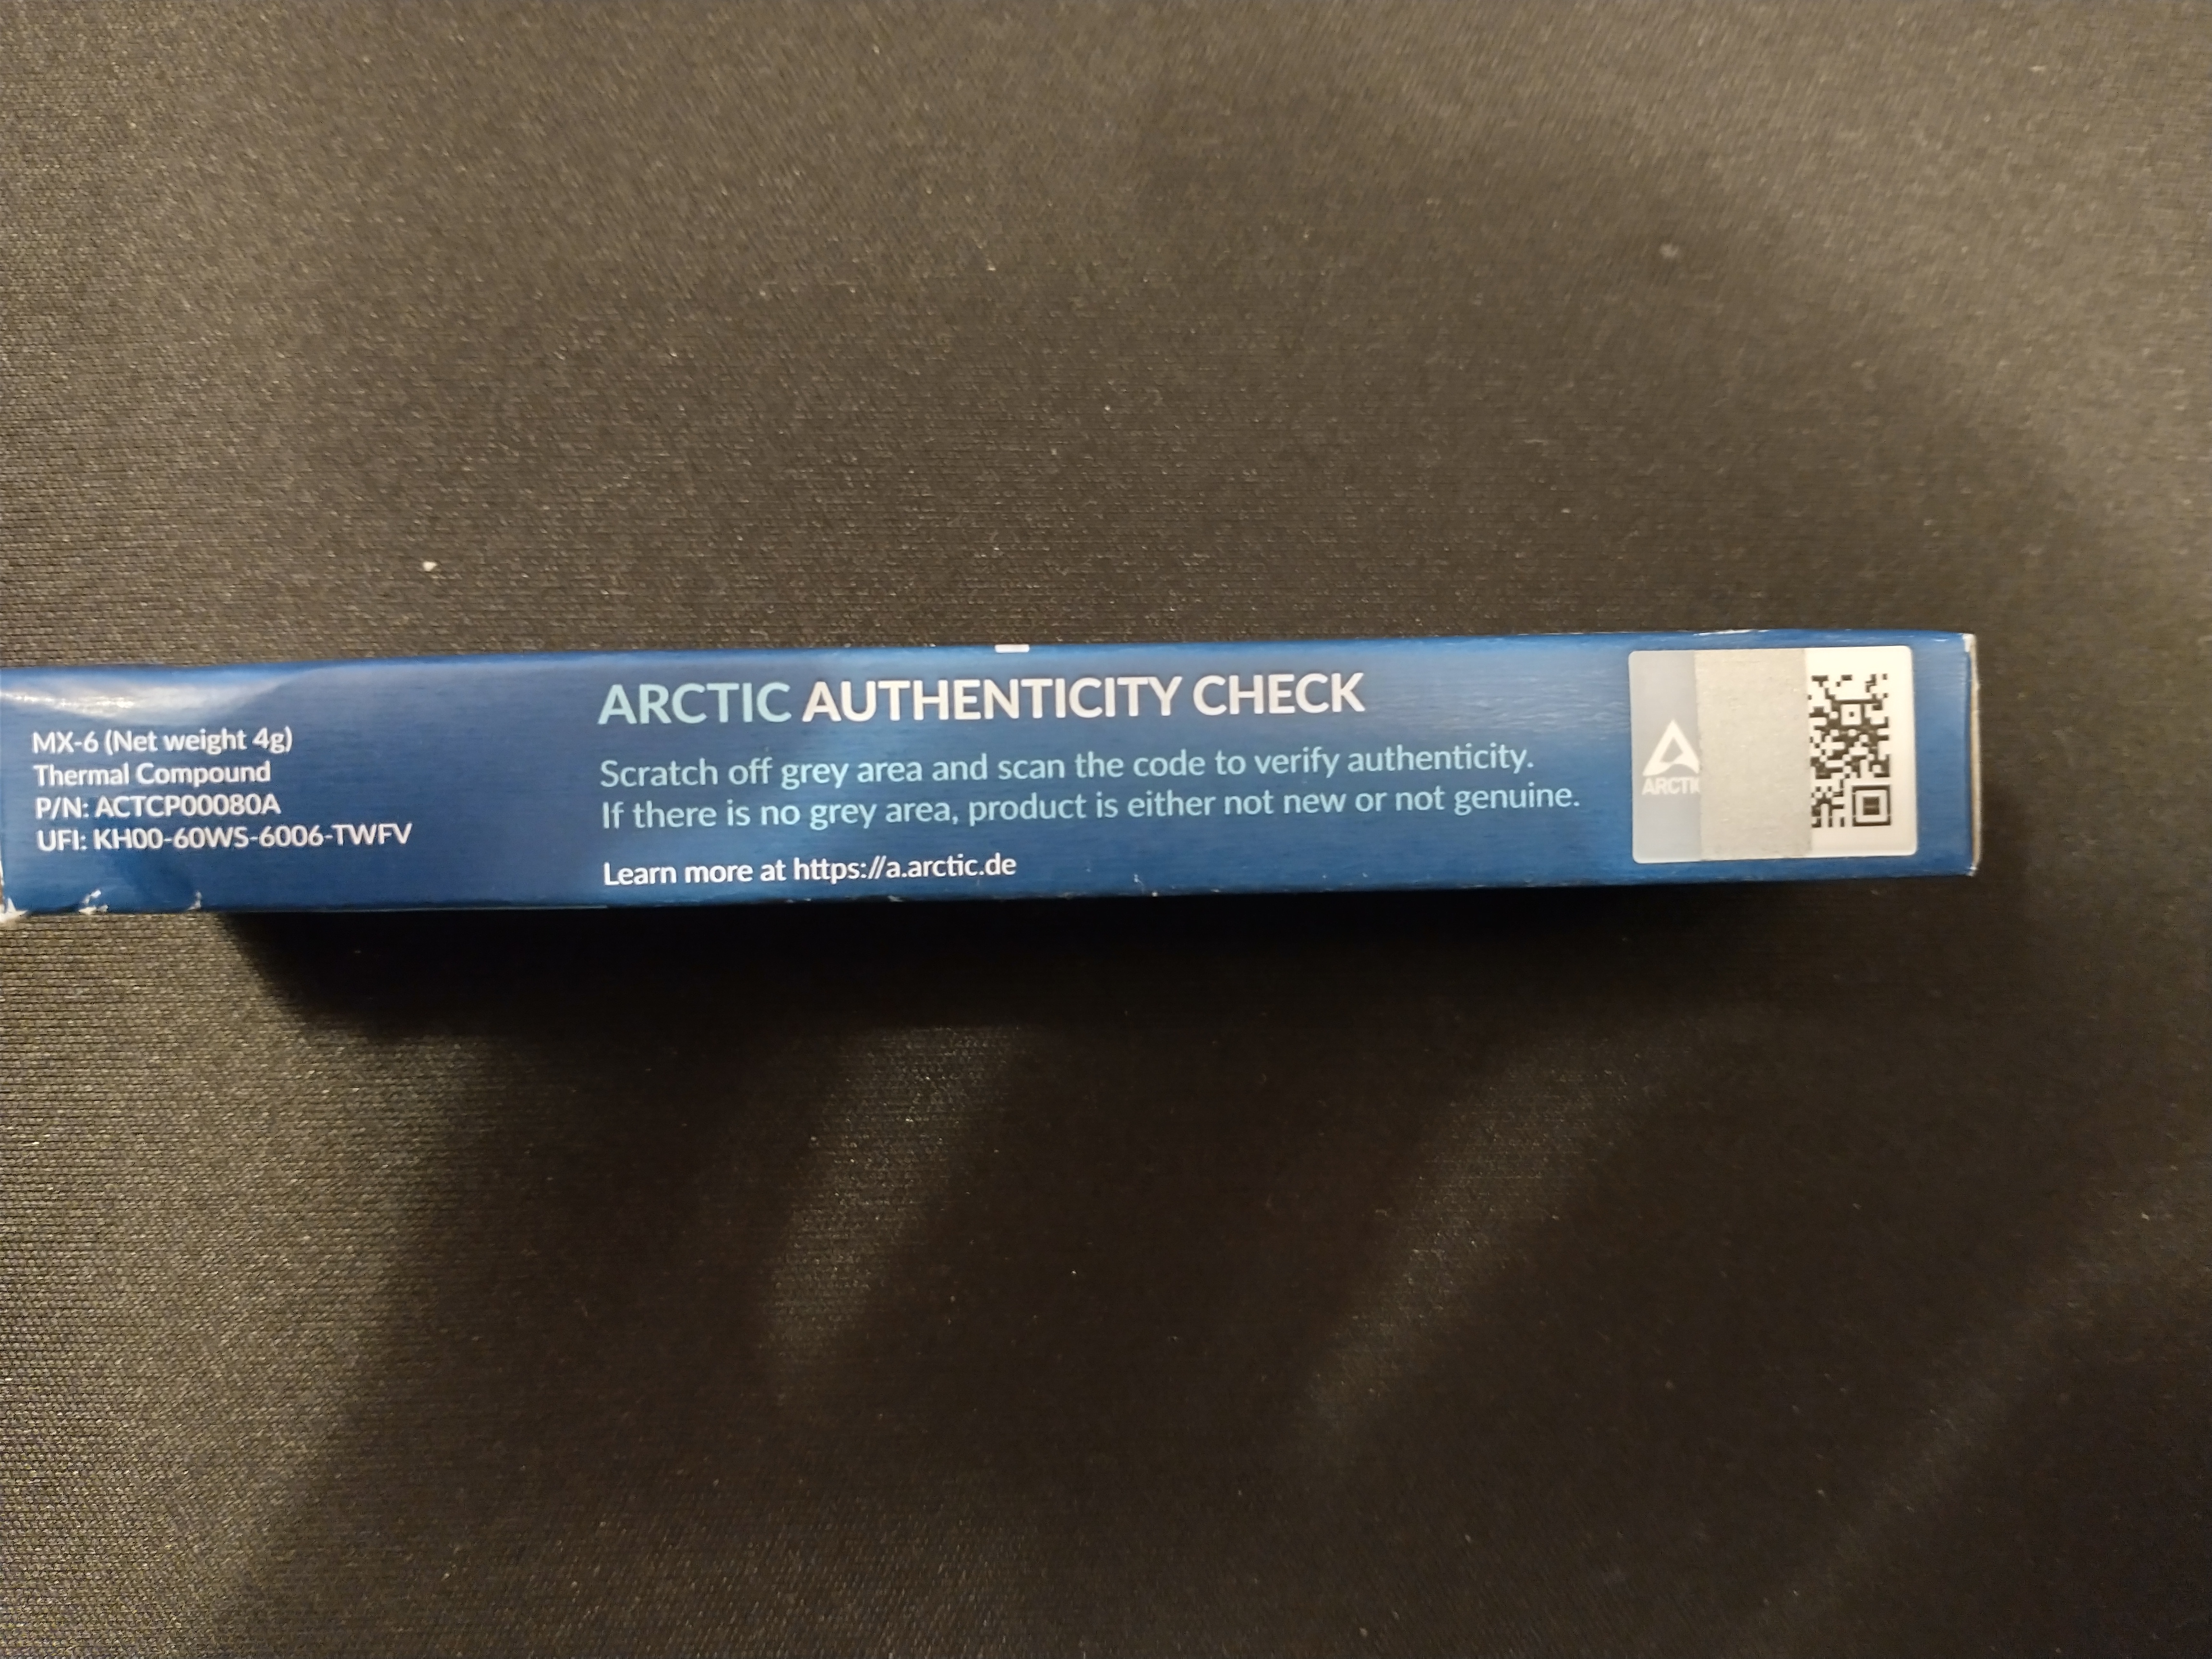 Arctic MX-6 Thermal Grease to Replace Storied MX-5